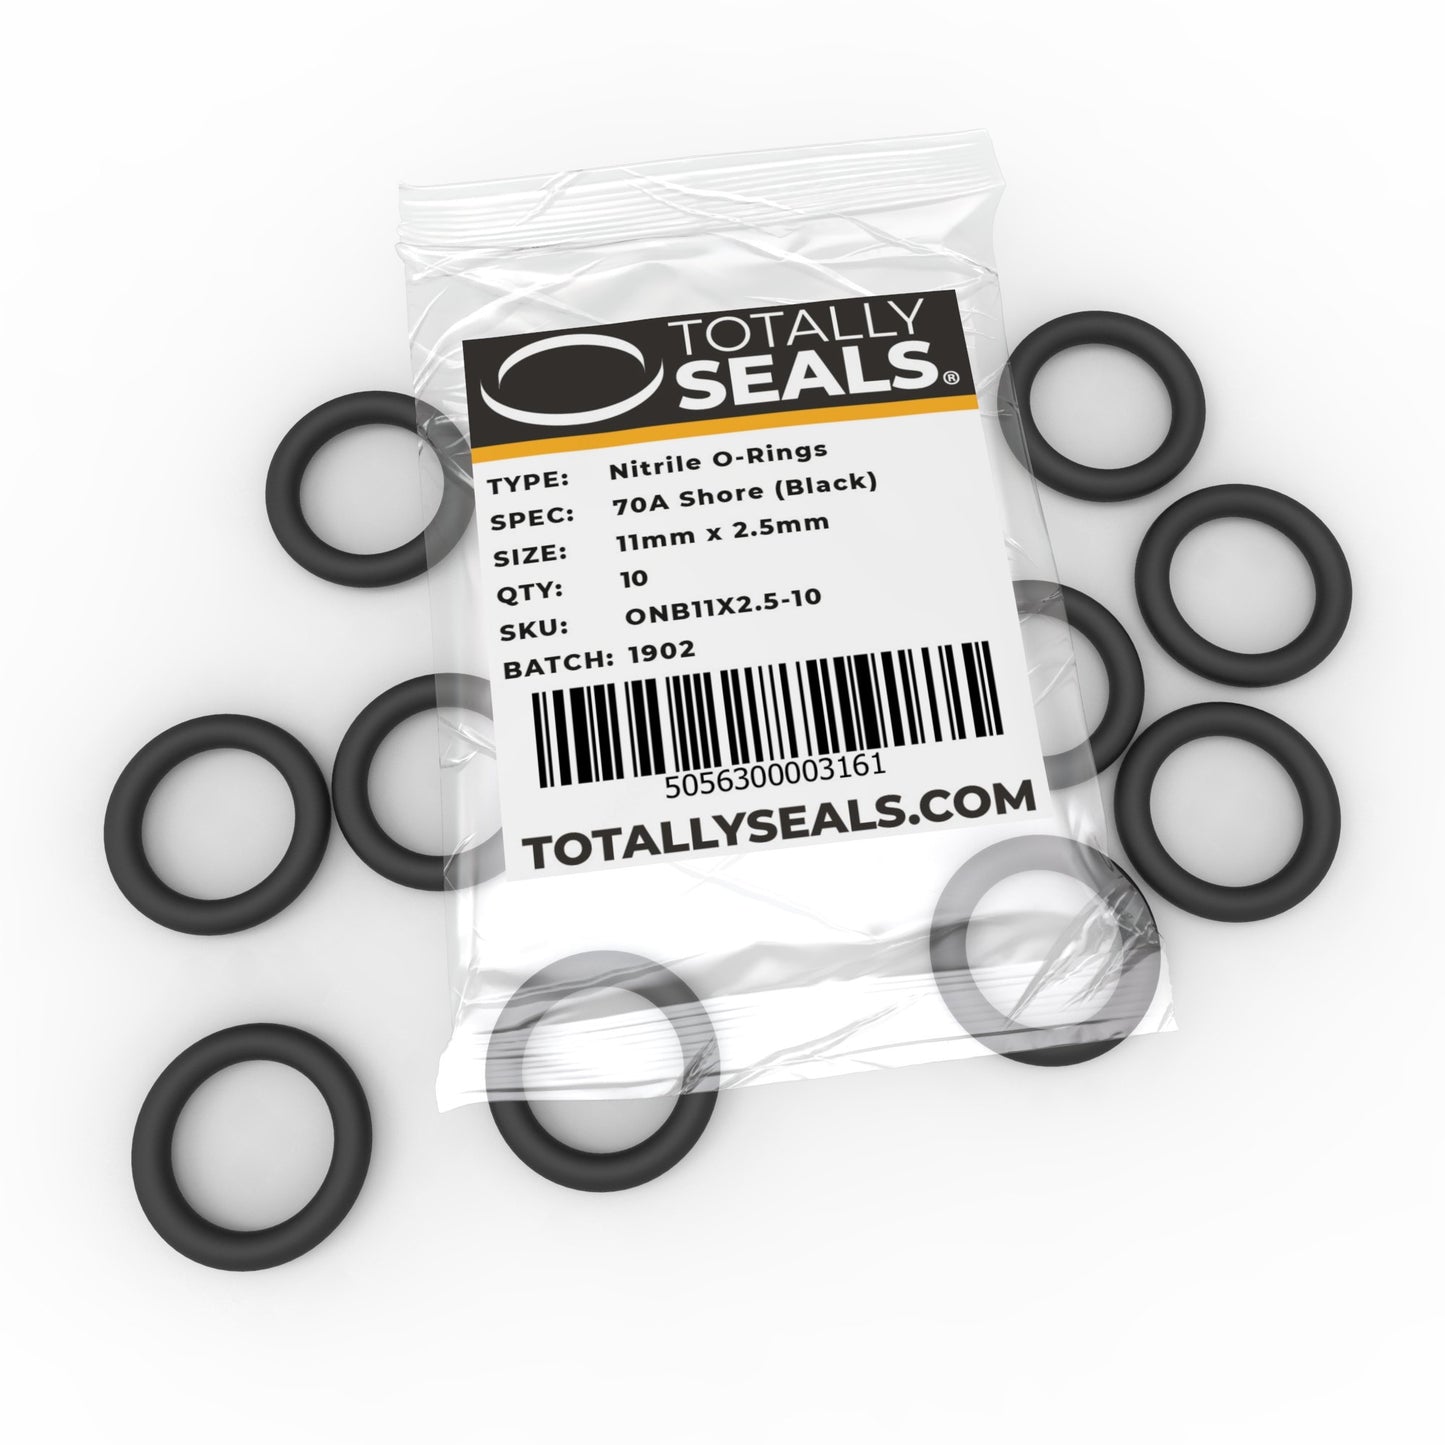 11mm x 2.5mm (16mm OD) Nitrile O-Rings - Totally Seals®